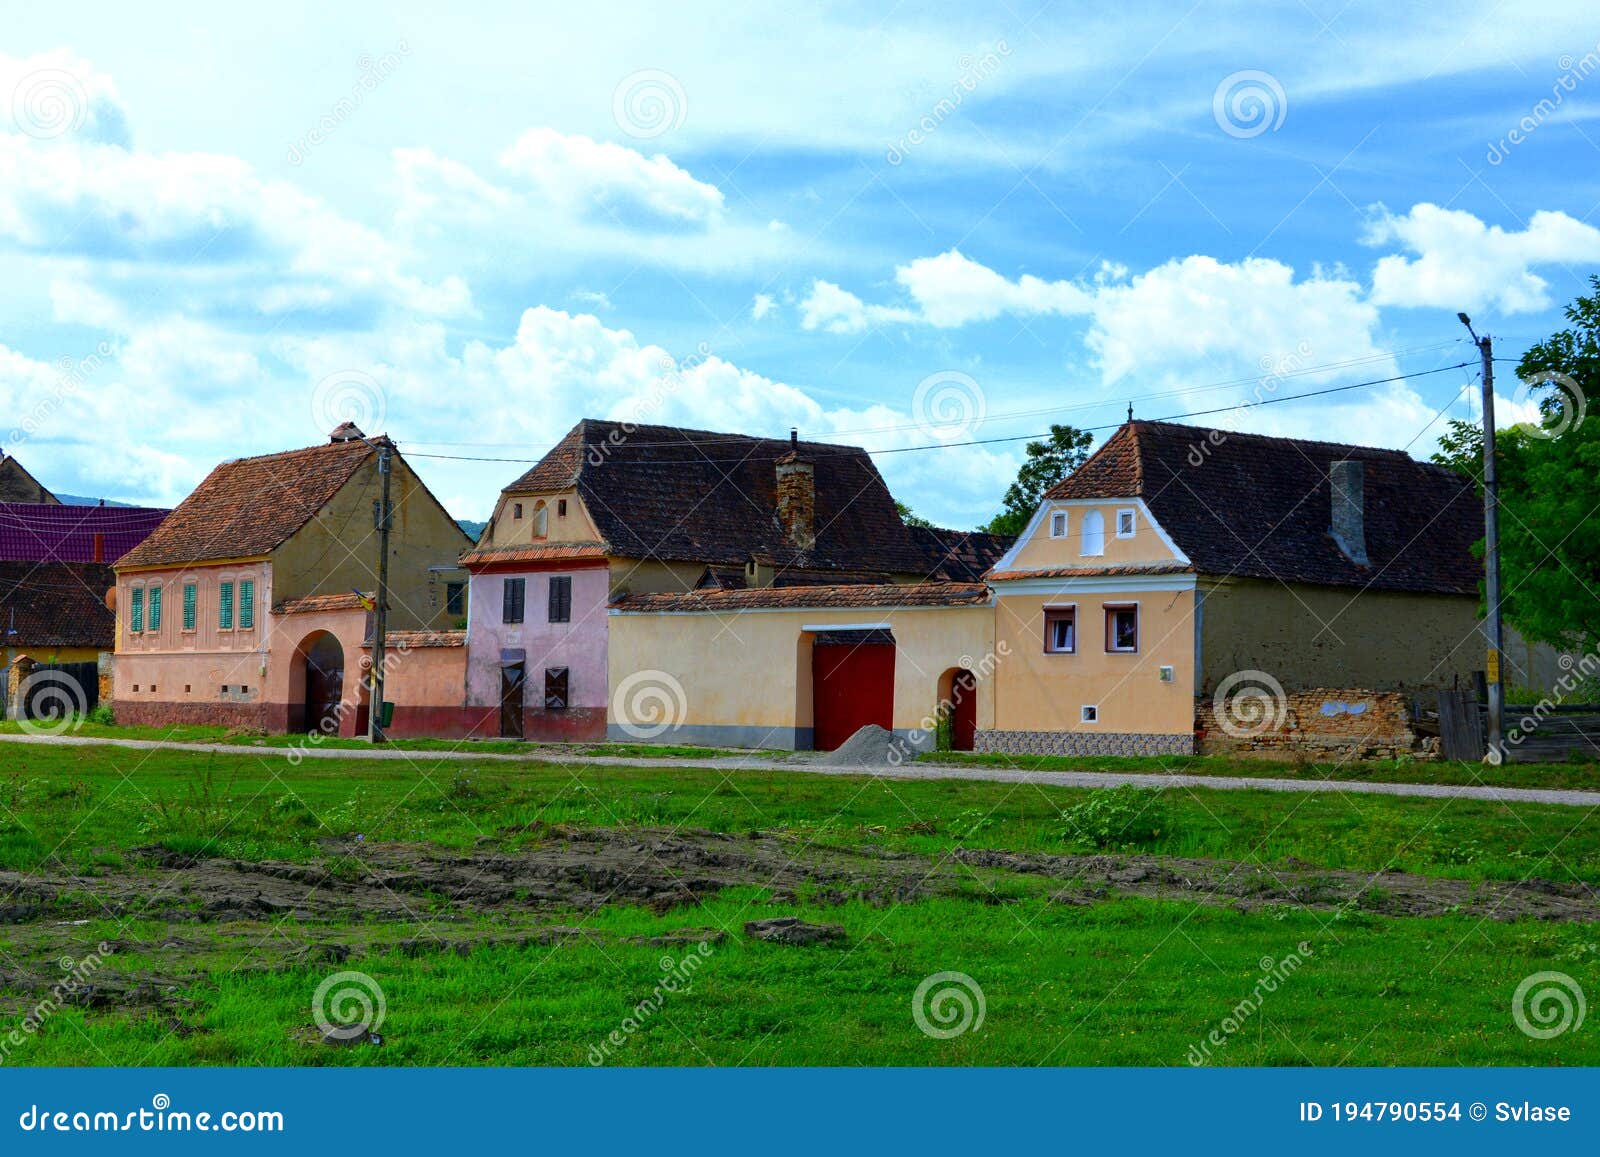 Old Houses . Typical Rural Landscape and Peasant Houses in the Village ...